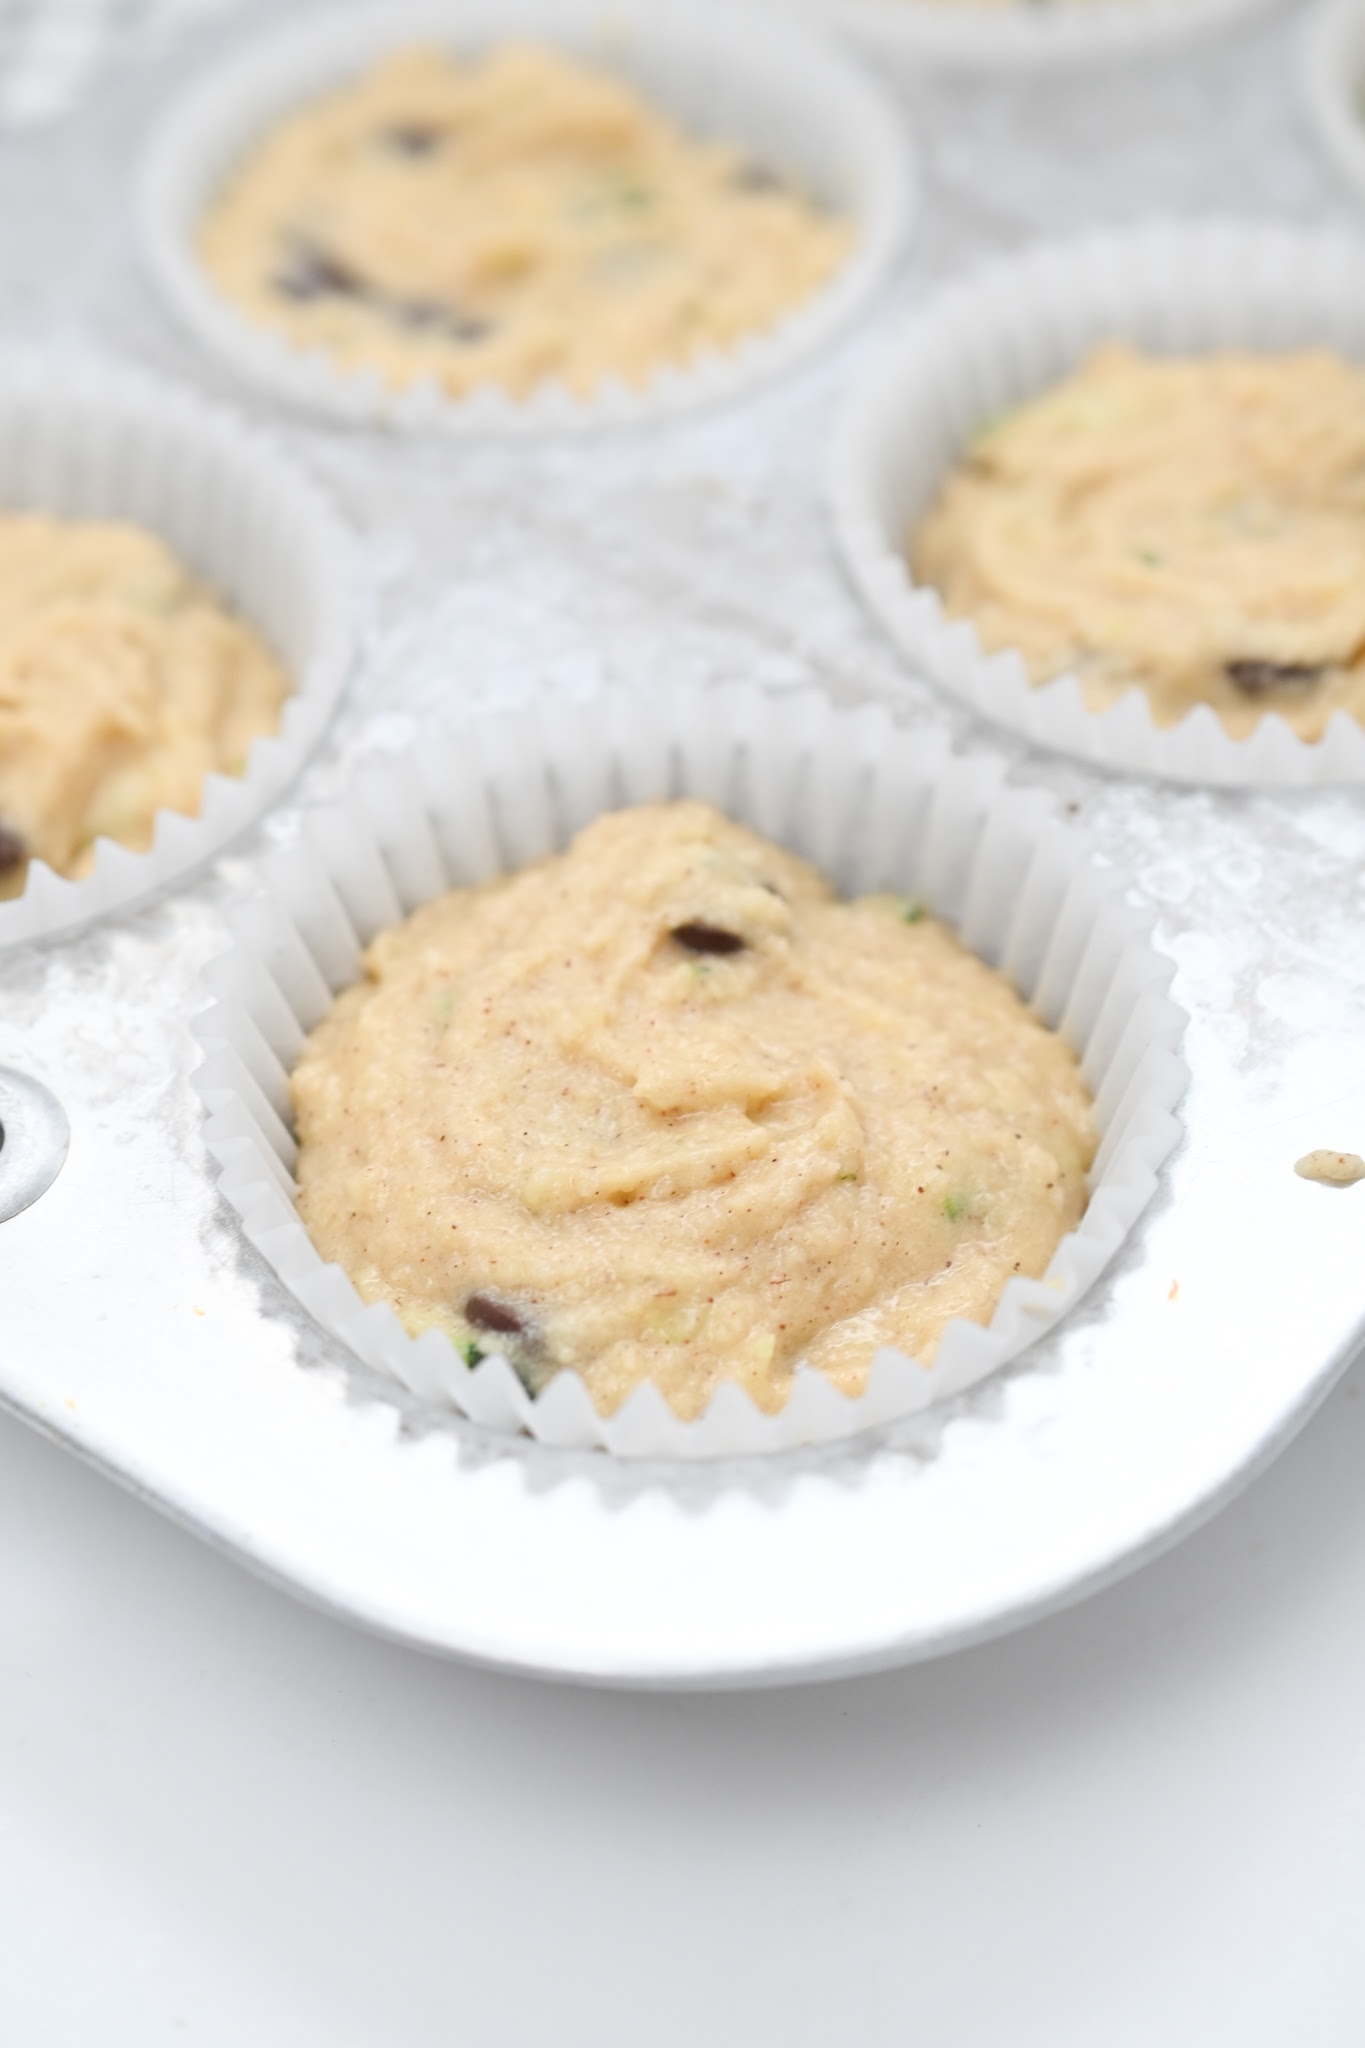 Unbaked muffin batter in a muffin tin